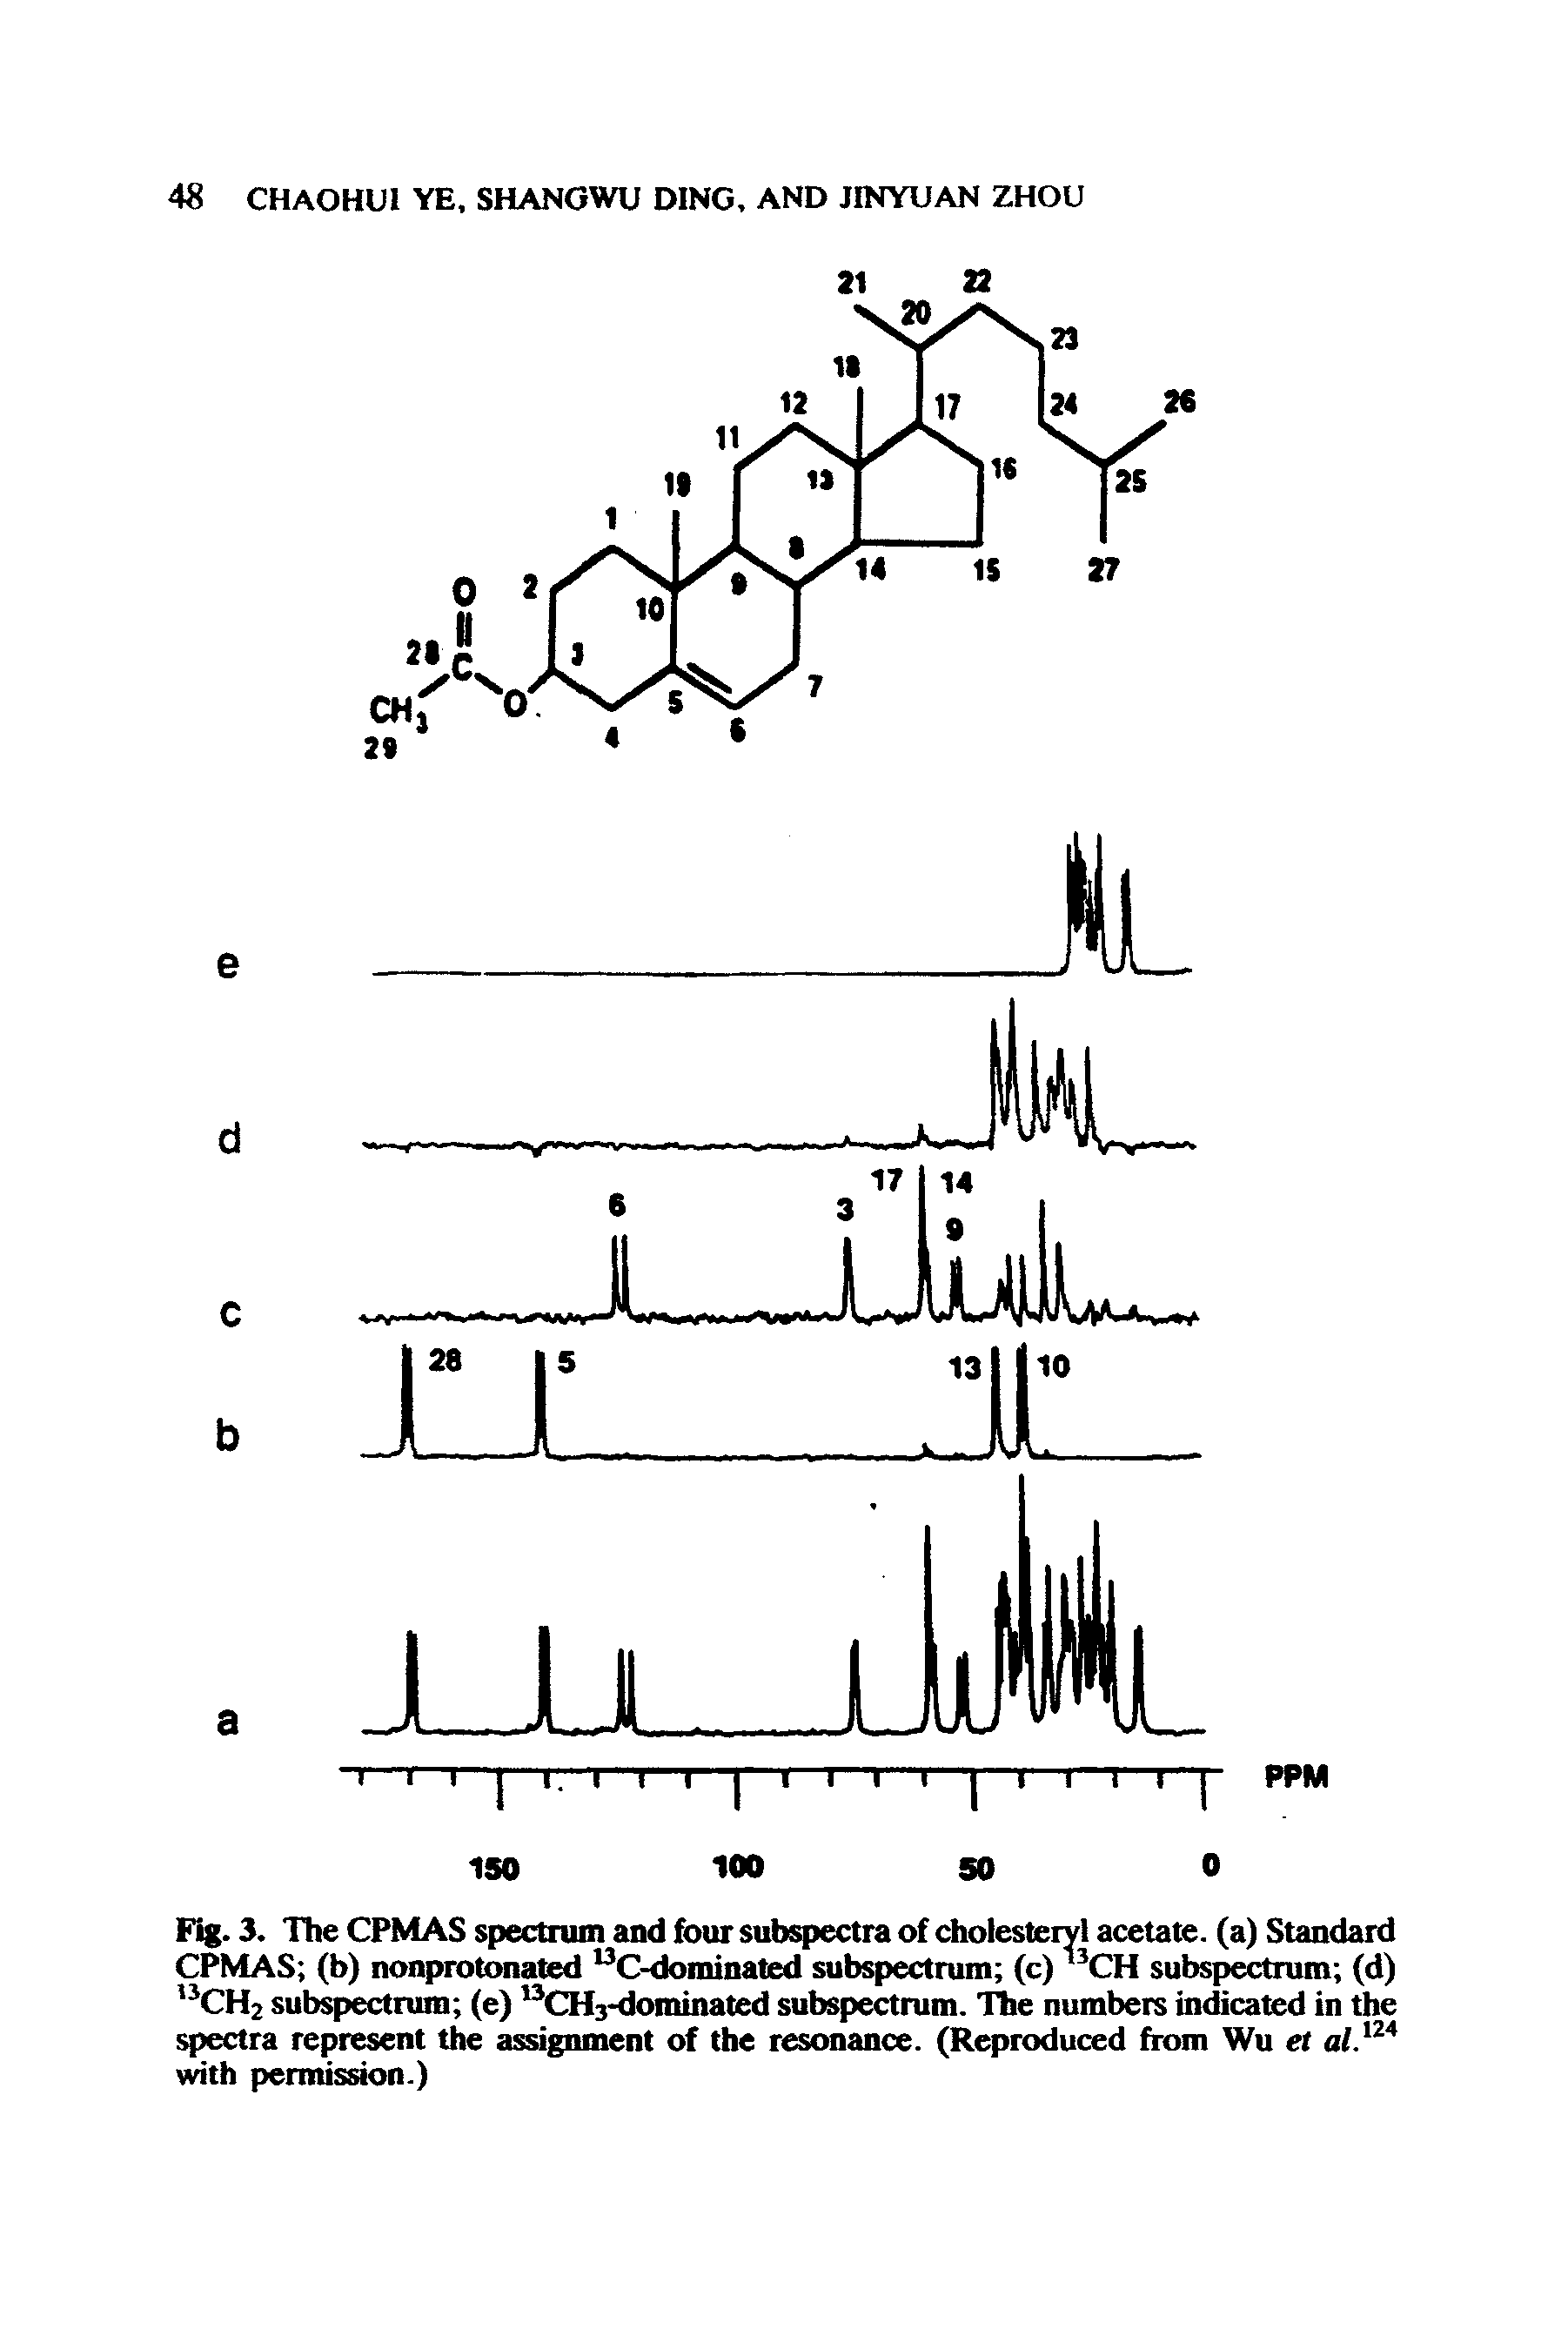 Fig. 3. The CPMAS spectrum and four subspectra of cholesteiyl acetate, (a) Standard CPMAS (b) nonprotonated C-dominated subspectrum (c) subspectrum (d) CH2 subspectrum (e) CHs-dominated subspectrum. The numbers indicated in the spectra represent the assignment of the resonance. (Reproduced from Wu et with permission.)...